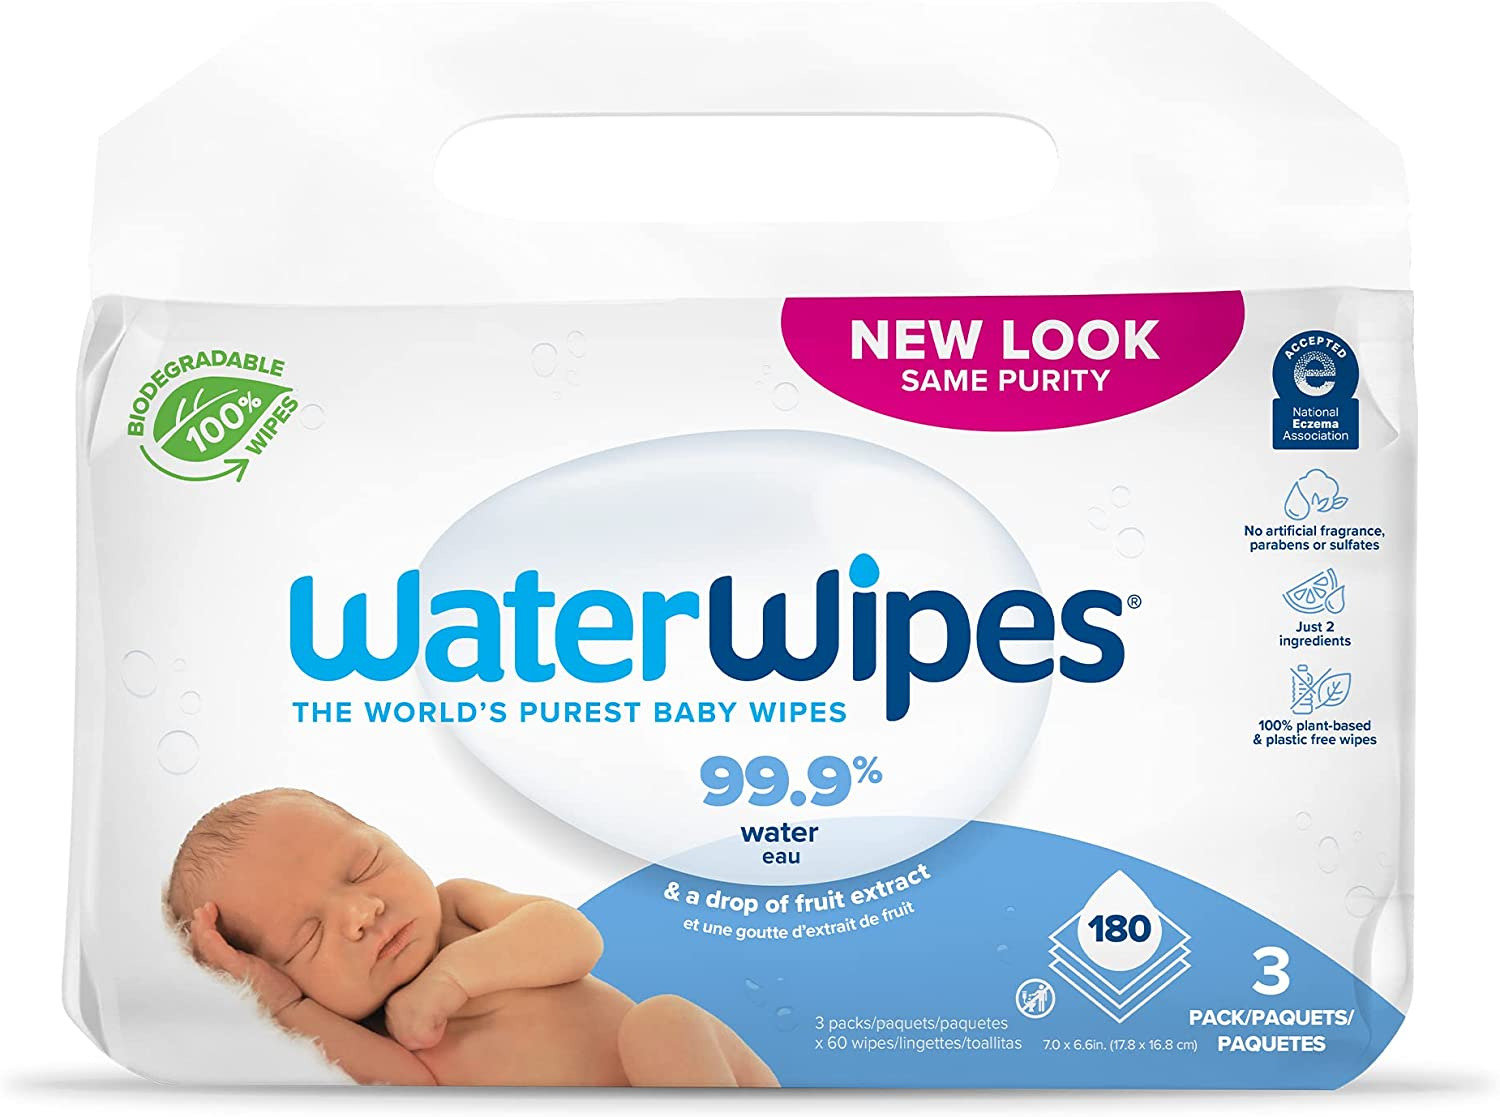 Waterwipes Biodegradable Original Baby Wipes, 99.9% Water Based Wipes, Unscented